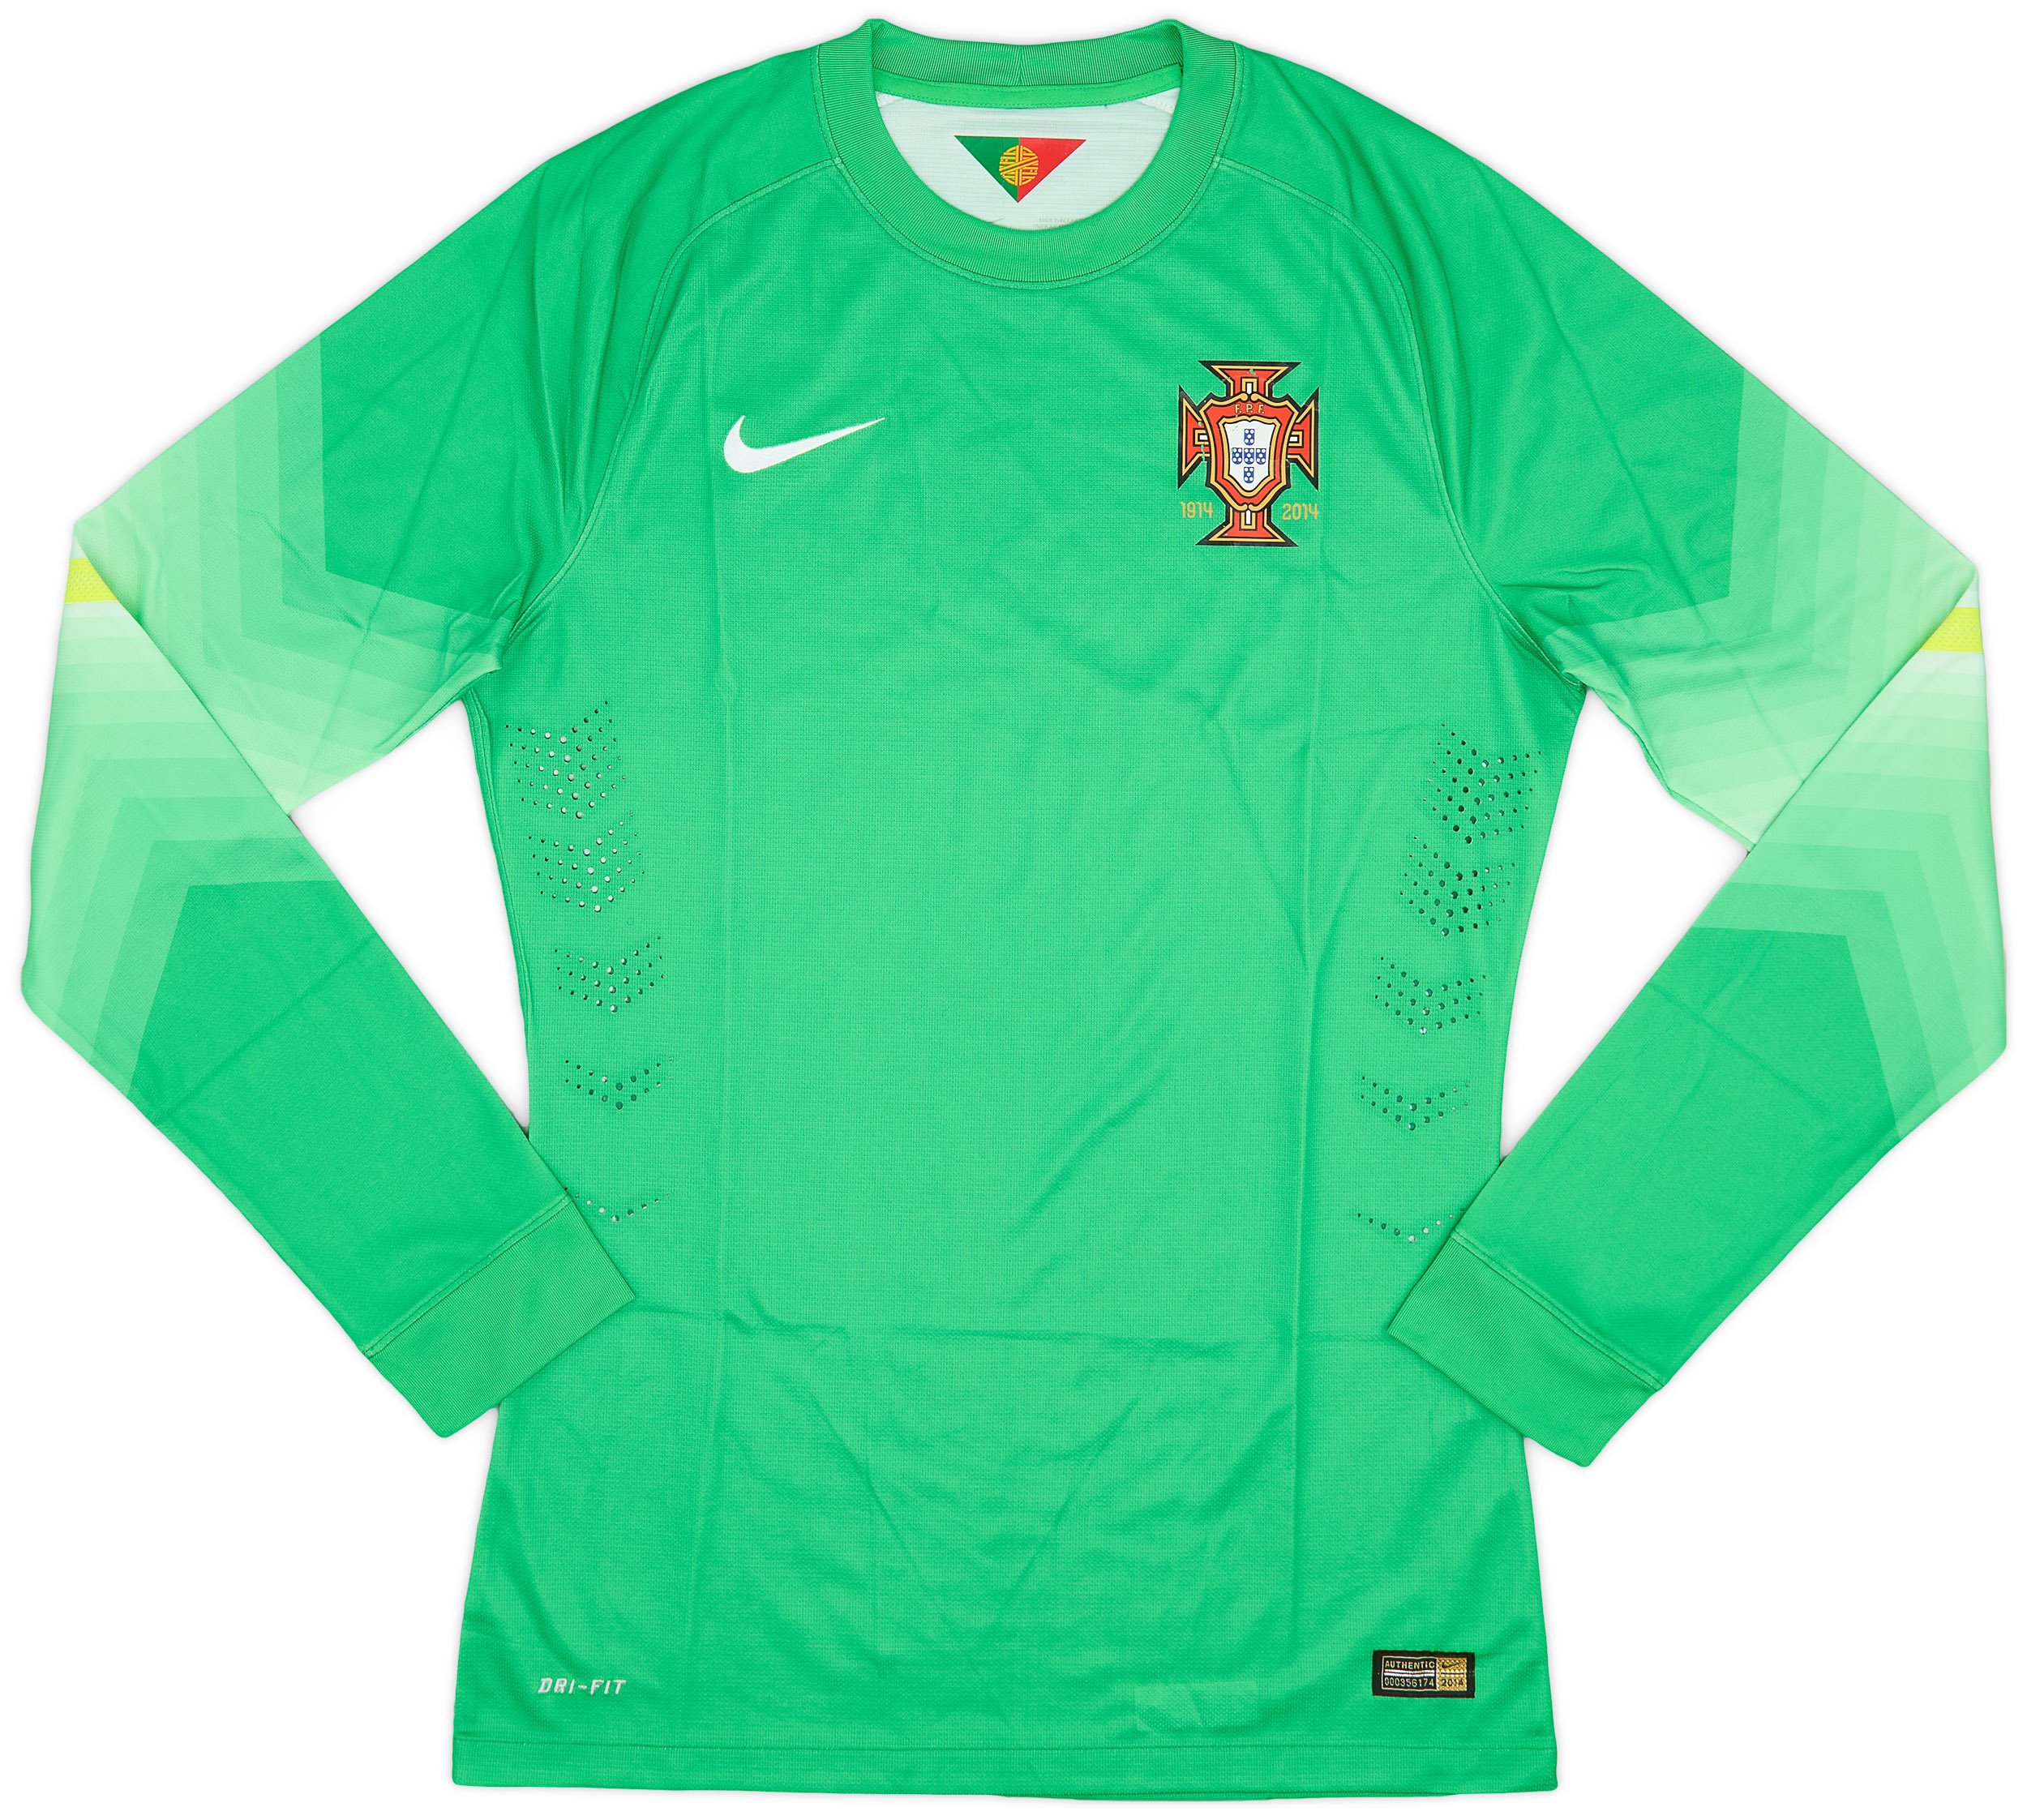 2014-16 Portugal Player Issue GK Shirt - 7/10 - ()